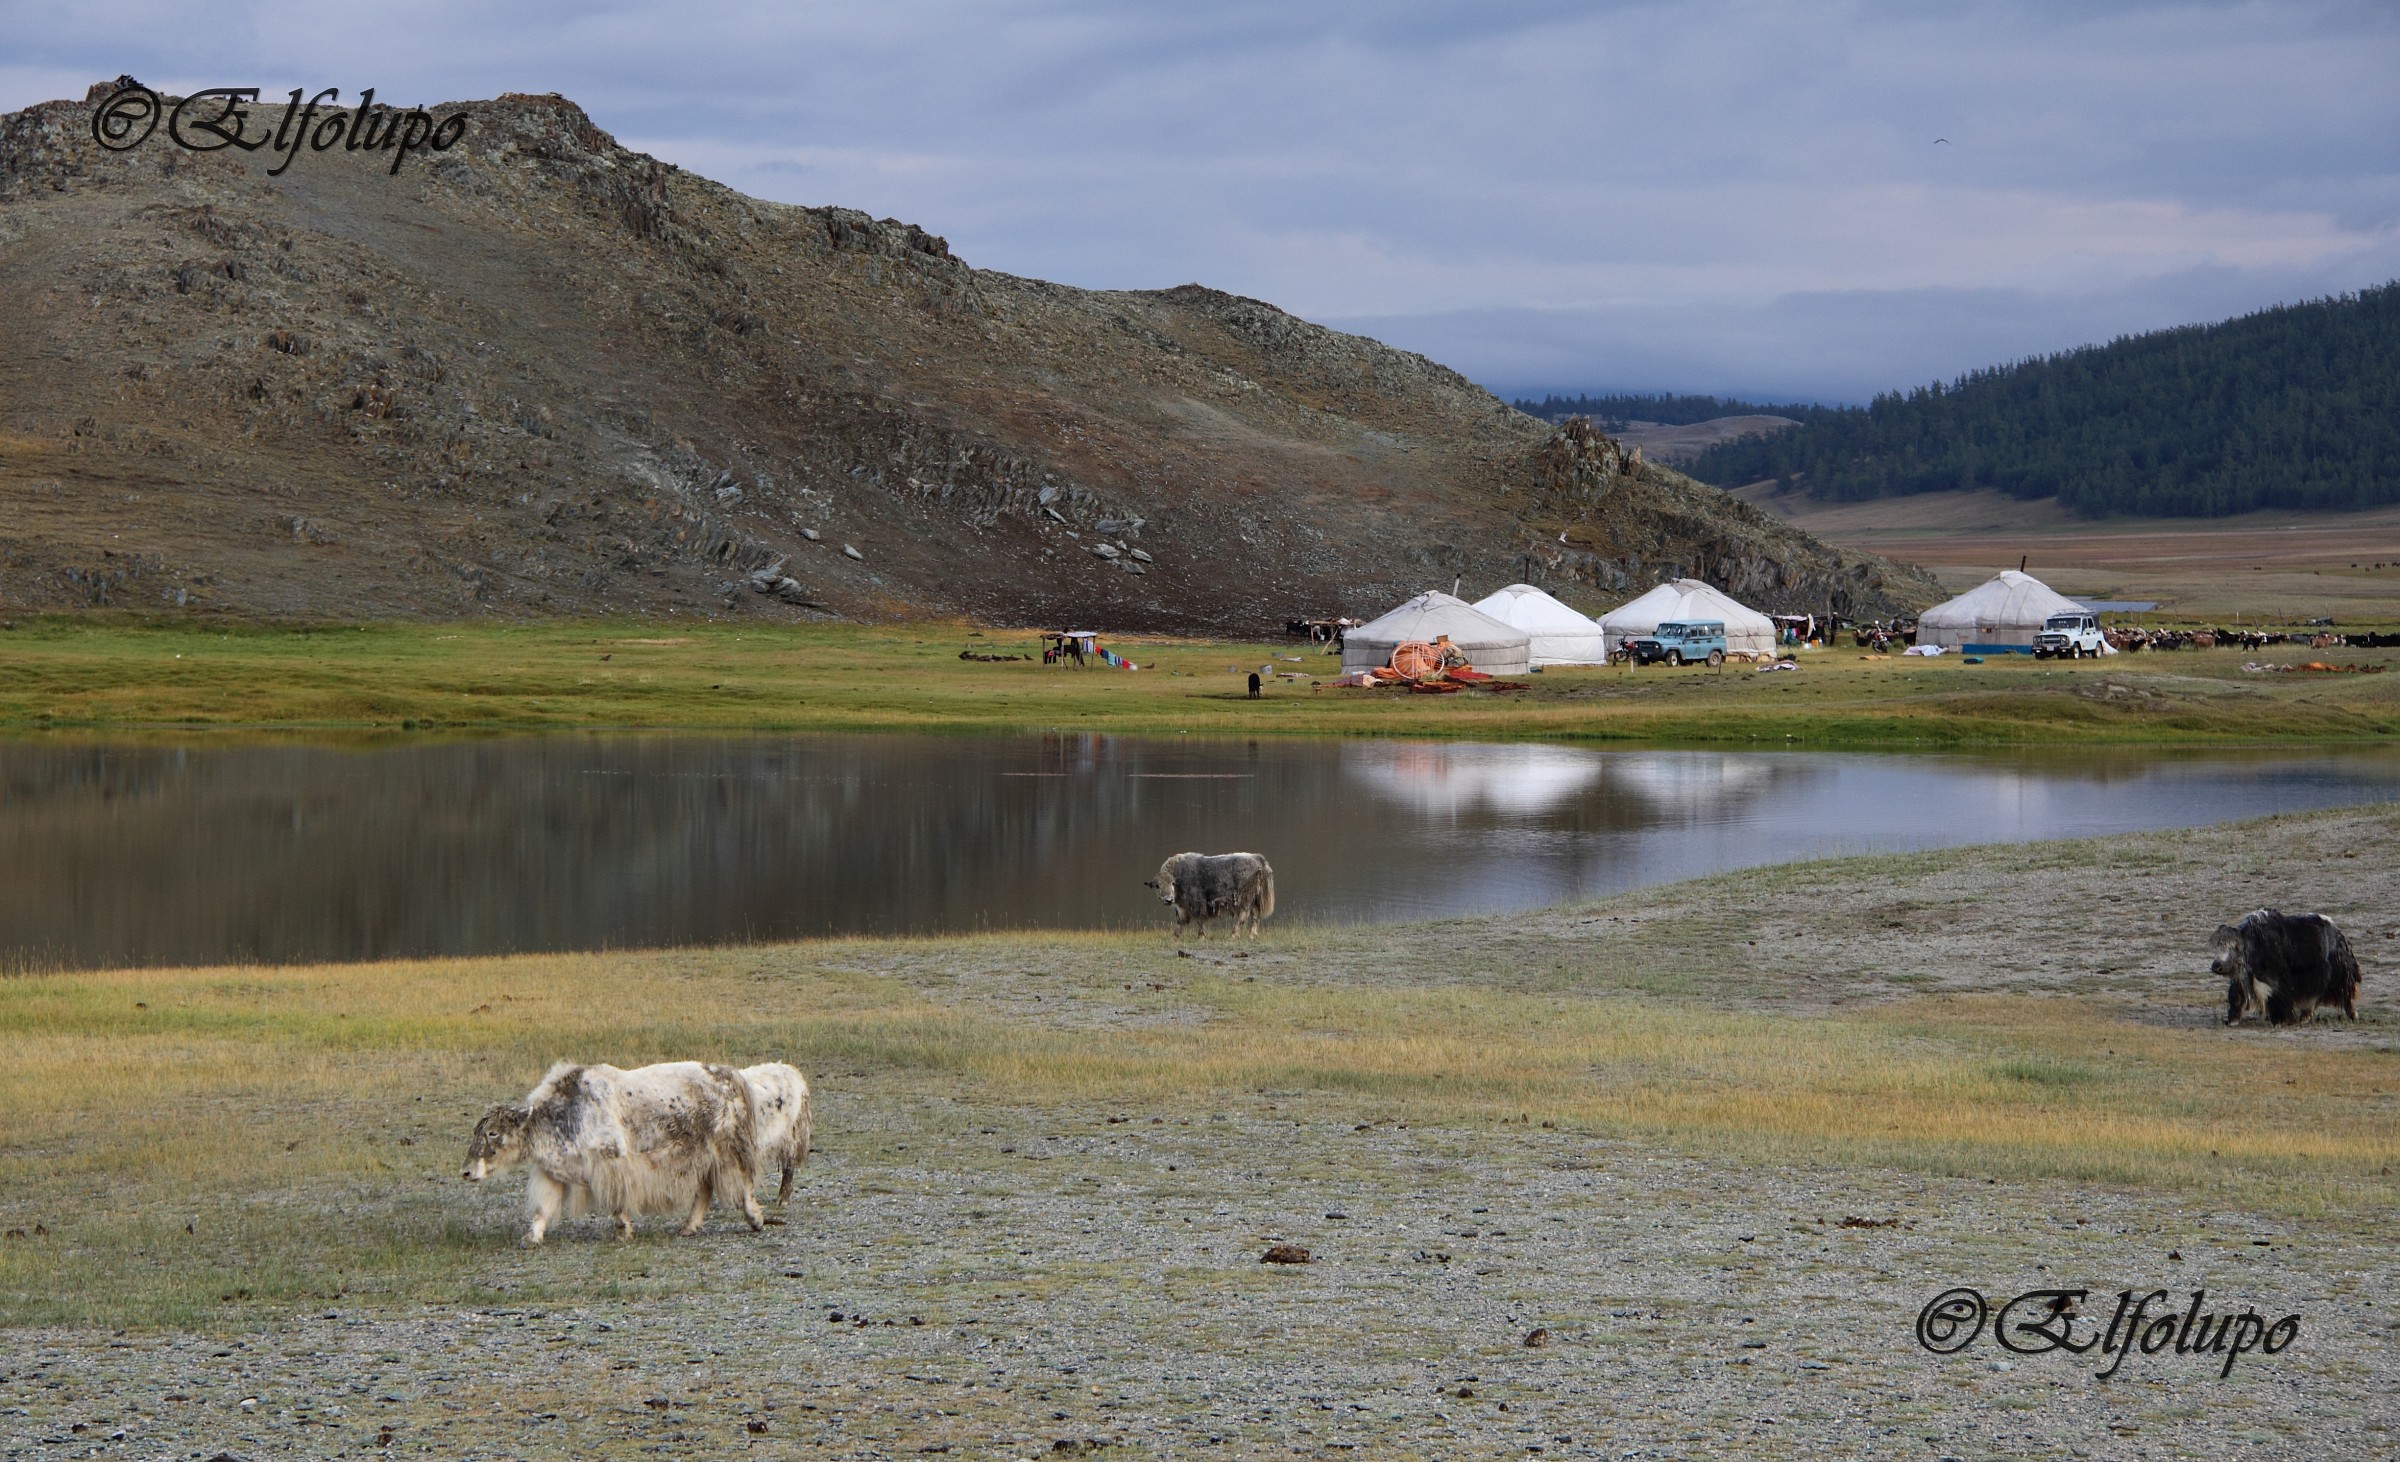 yaks and tents on the lake...